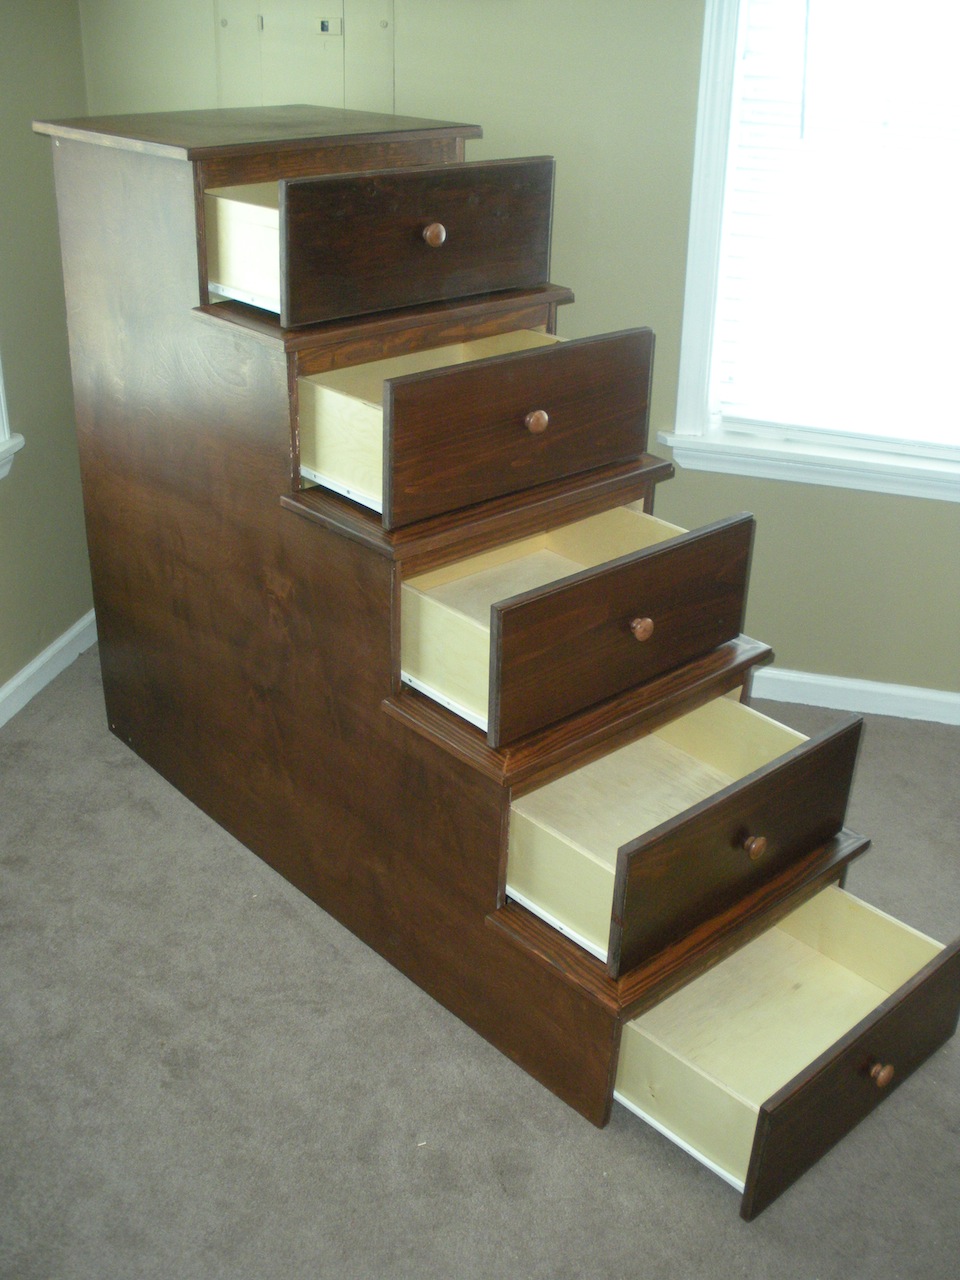 Richard S Bunk Bed Storage The Wood, How To Make A Loft Bed With Stairs